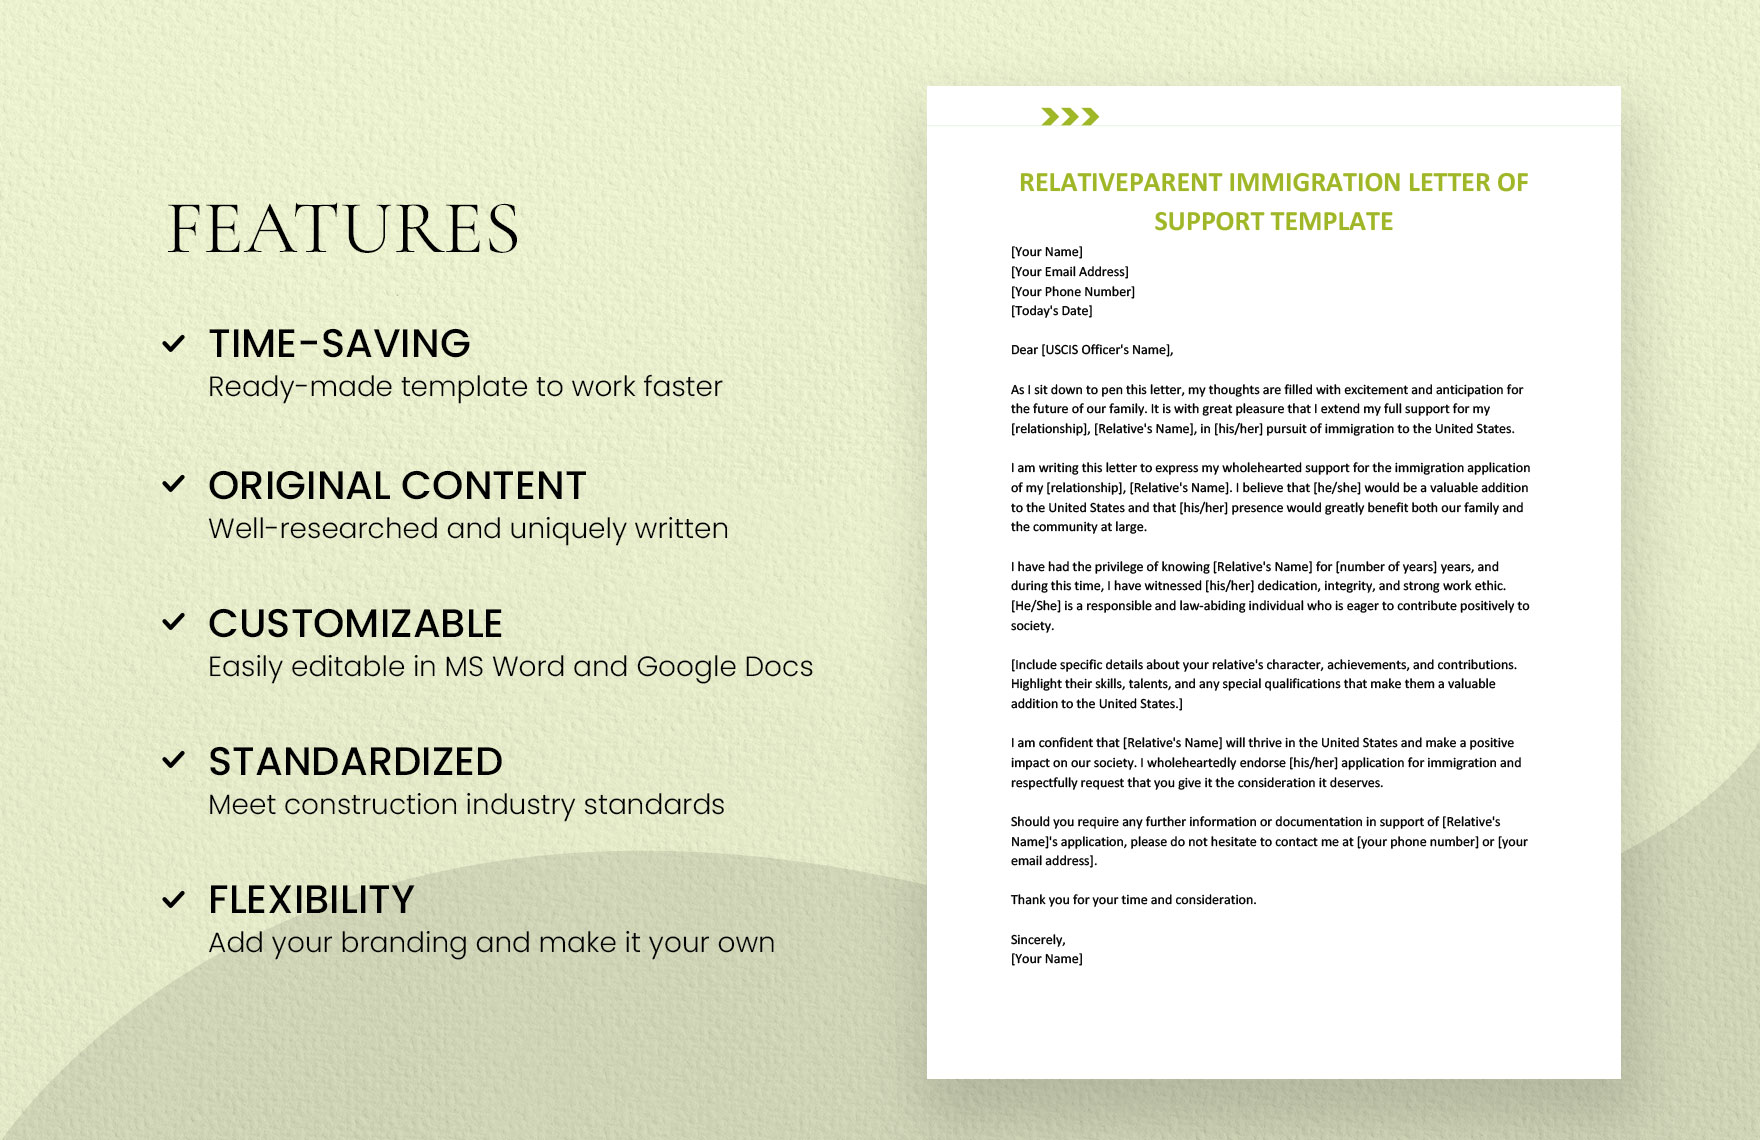 Relative/Parent Immigration Letter of Support Template